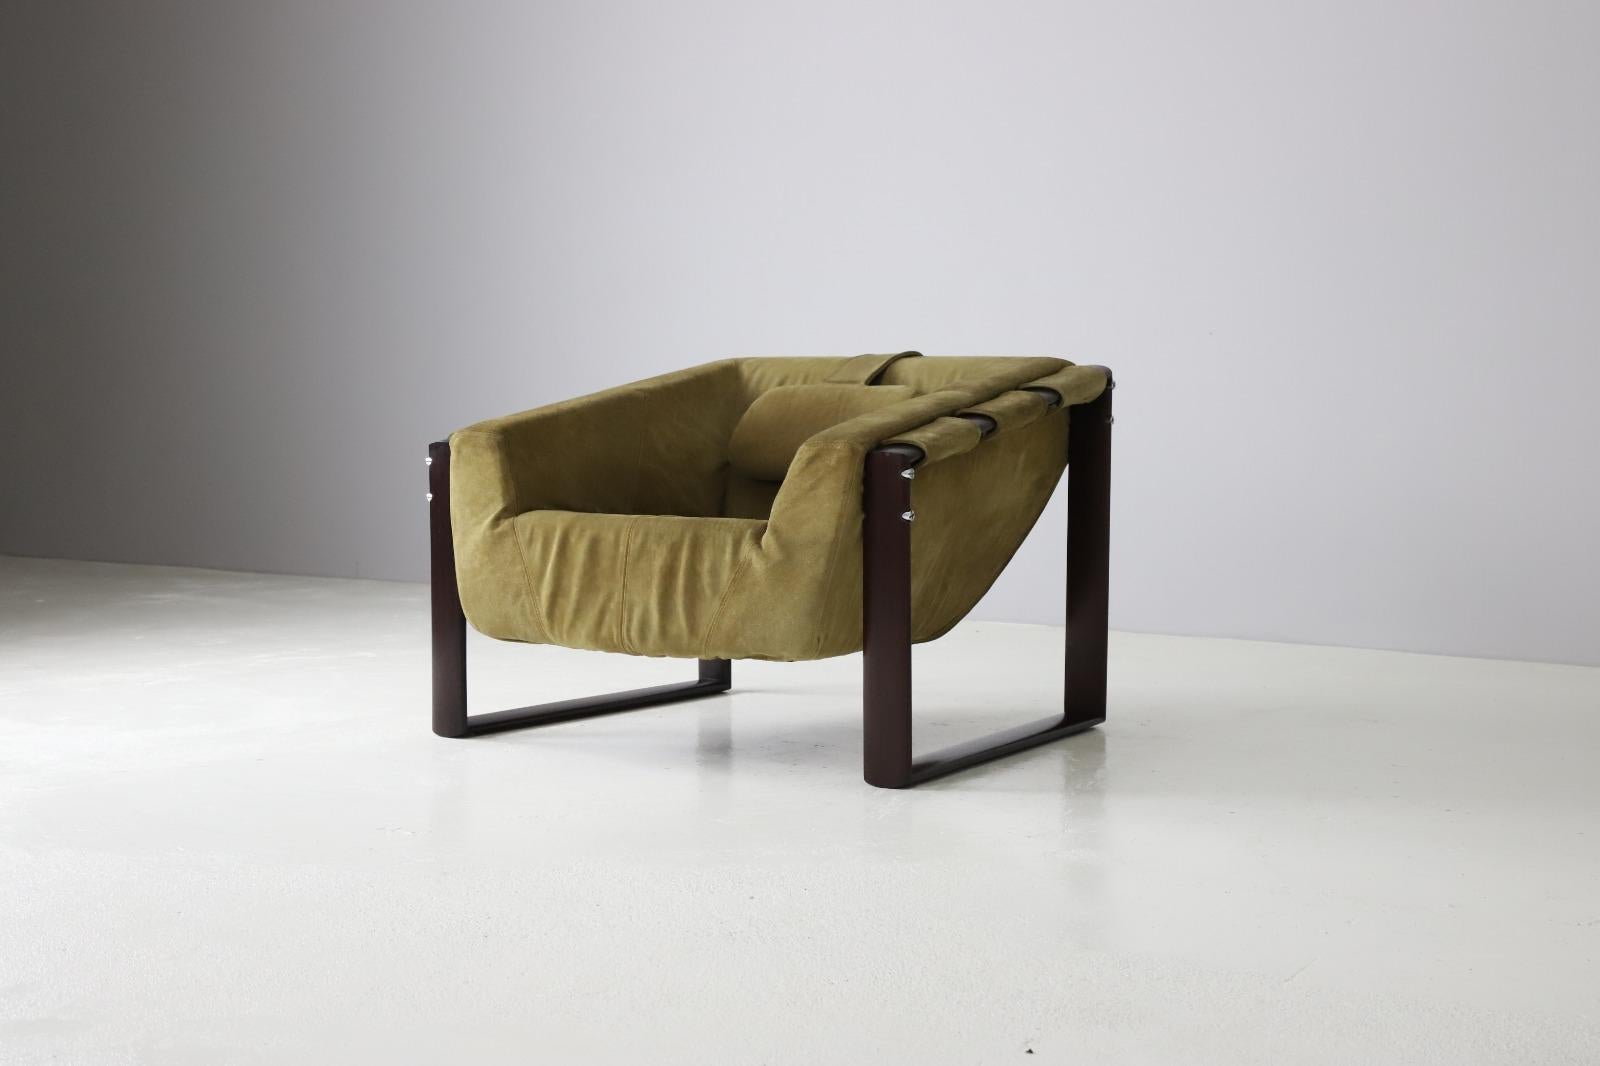 Fine Brazilian lounge chair designed by Percival Lafer in the 1960s. Original suede leather seat supported by a solid rosewood frame. The whole construction is held together by nicely detailed chromed metal screws.
A chunky but elegant design.